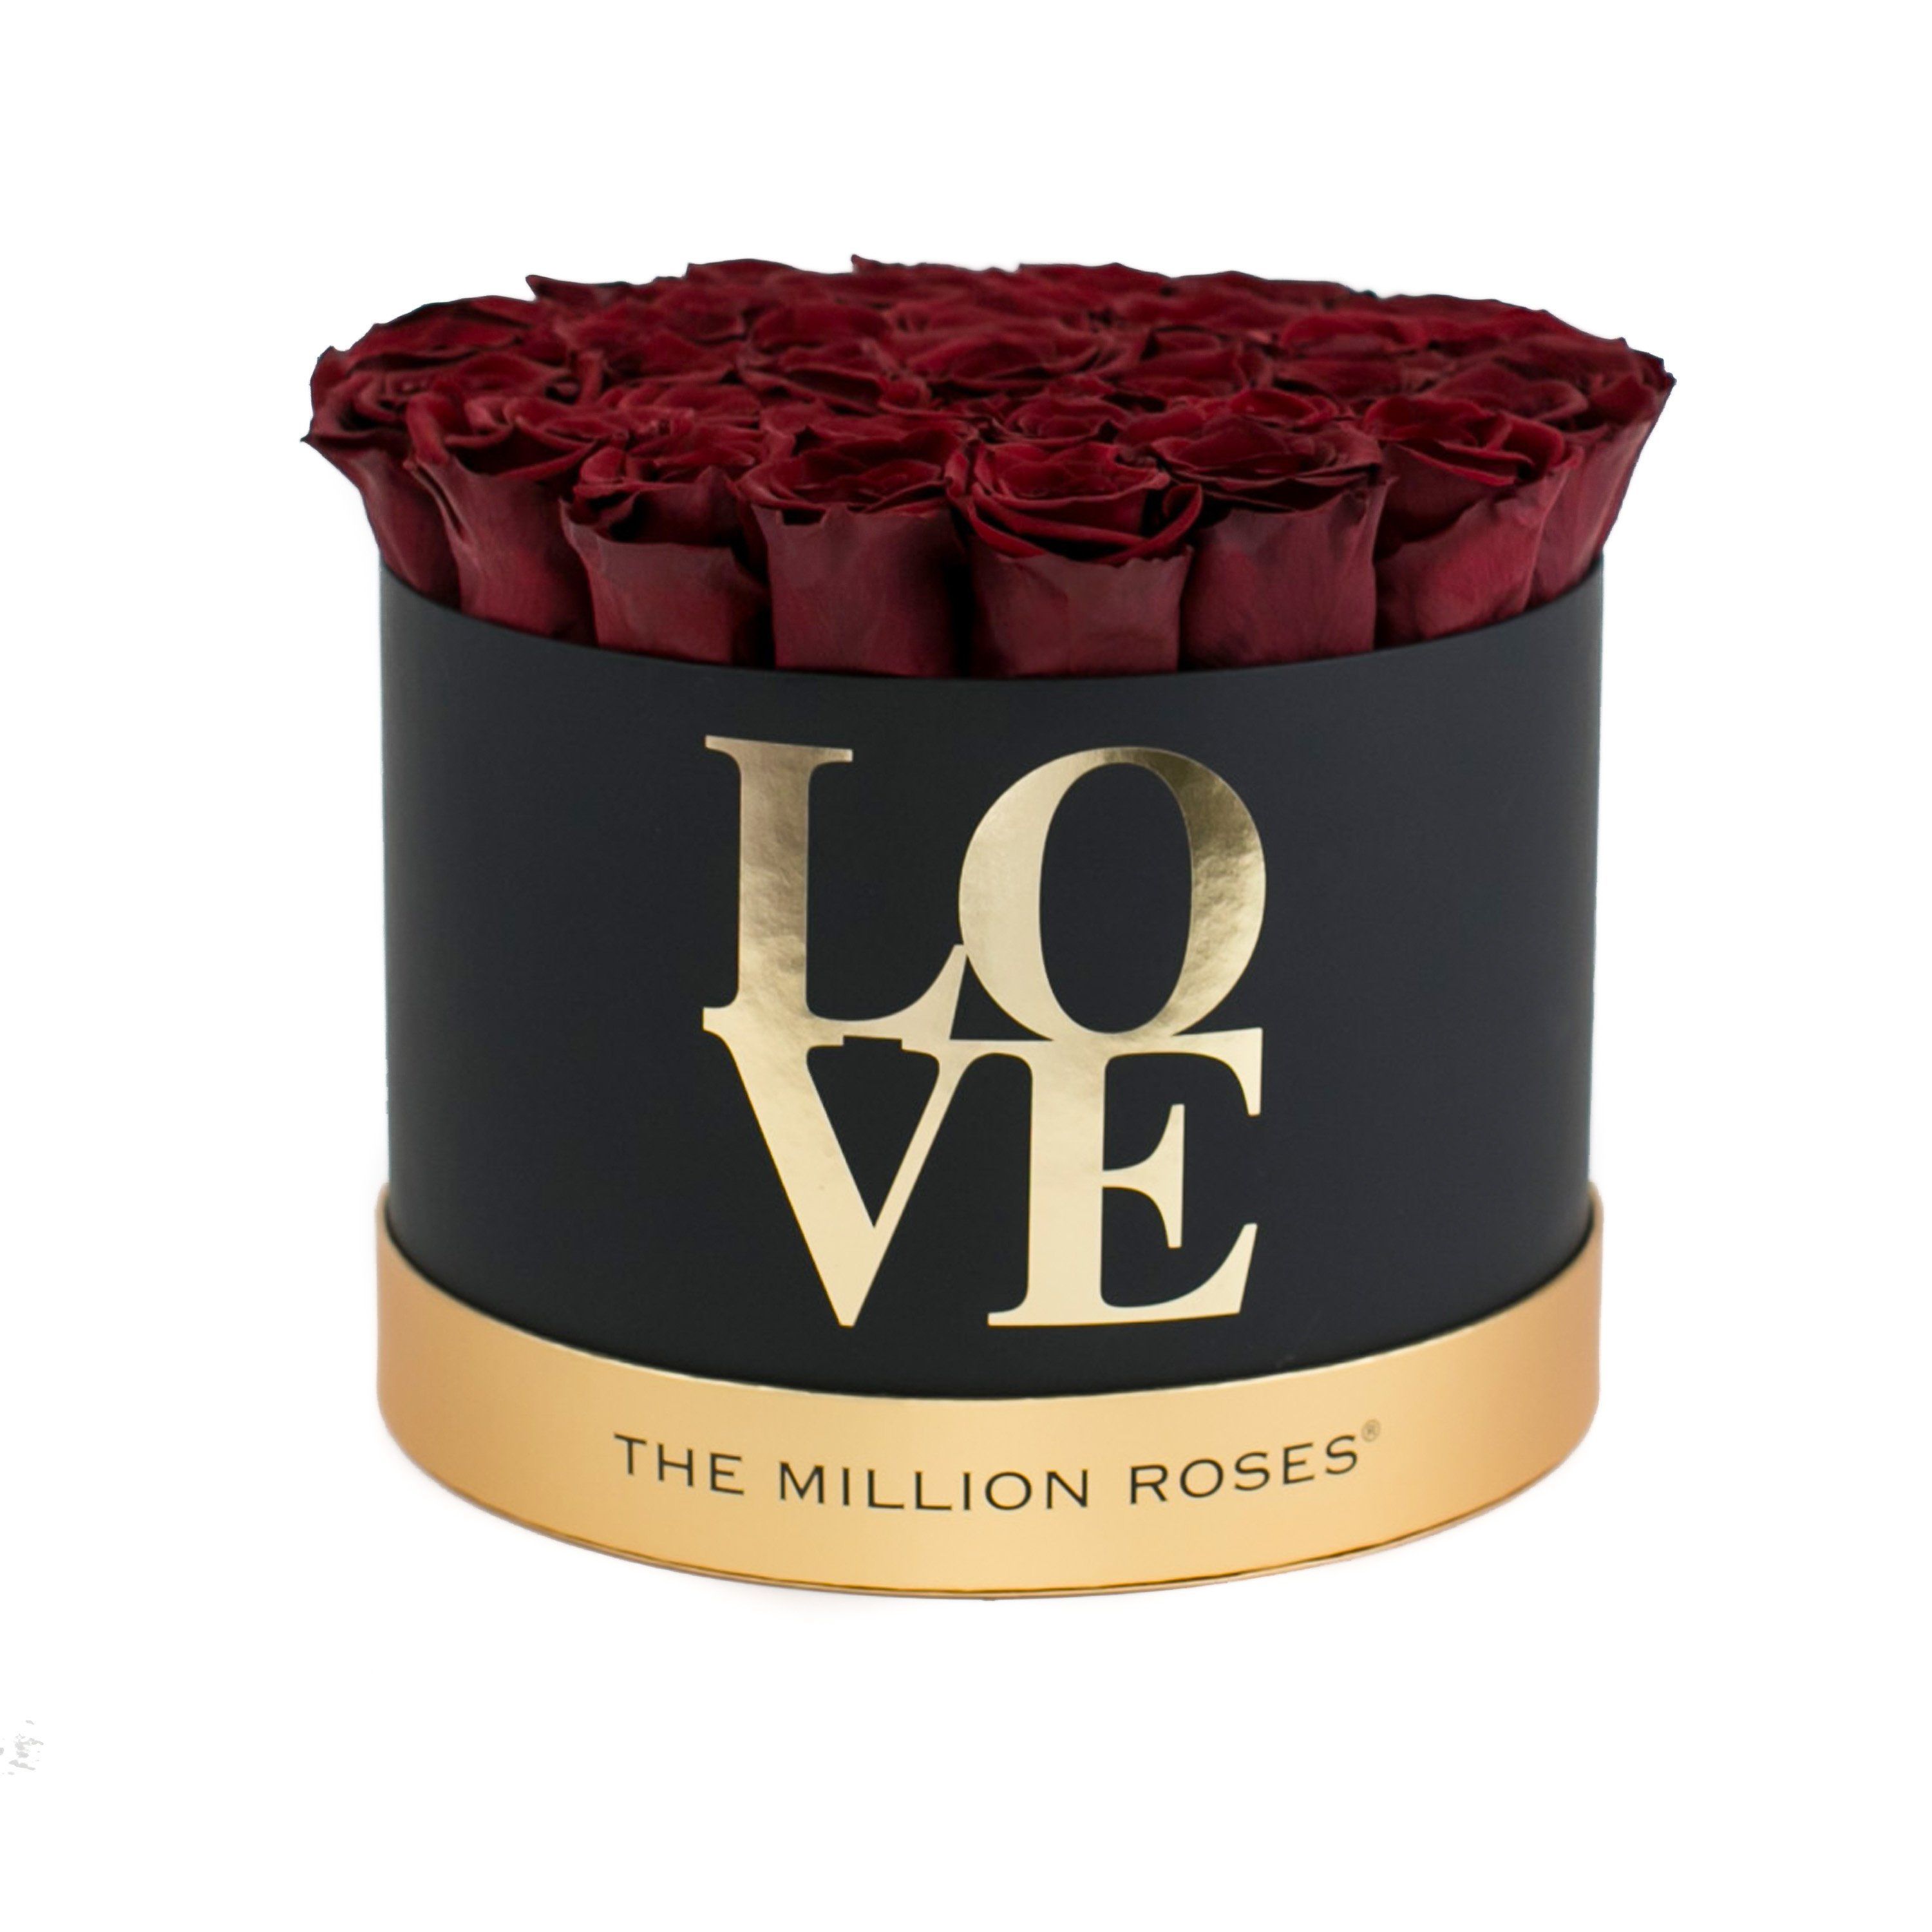 the million roses medium round box - "Love Collection" limited edition "LOVE" red eternity roses - the million roses